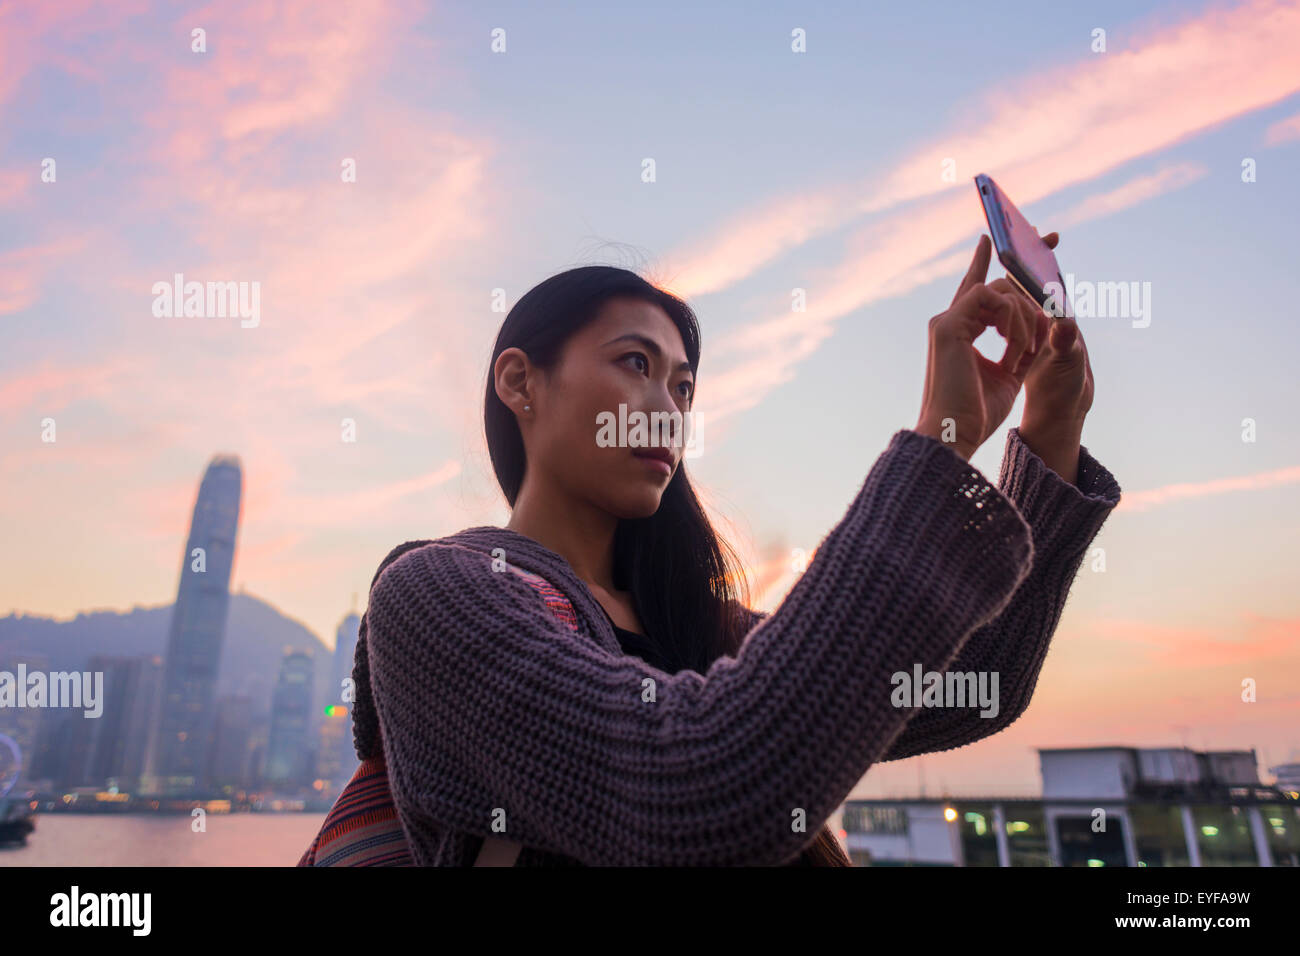 A young woman at the waterfront taking a picture at sunset with the skyline in the background, Kowloon; Hong Kong, China Stock Photo